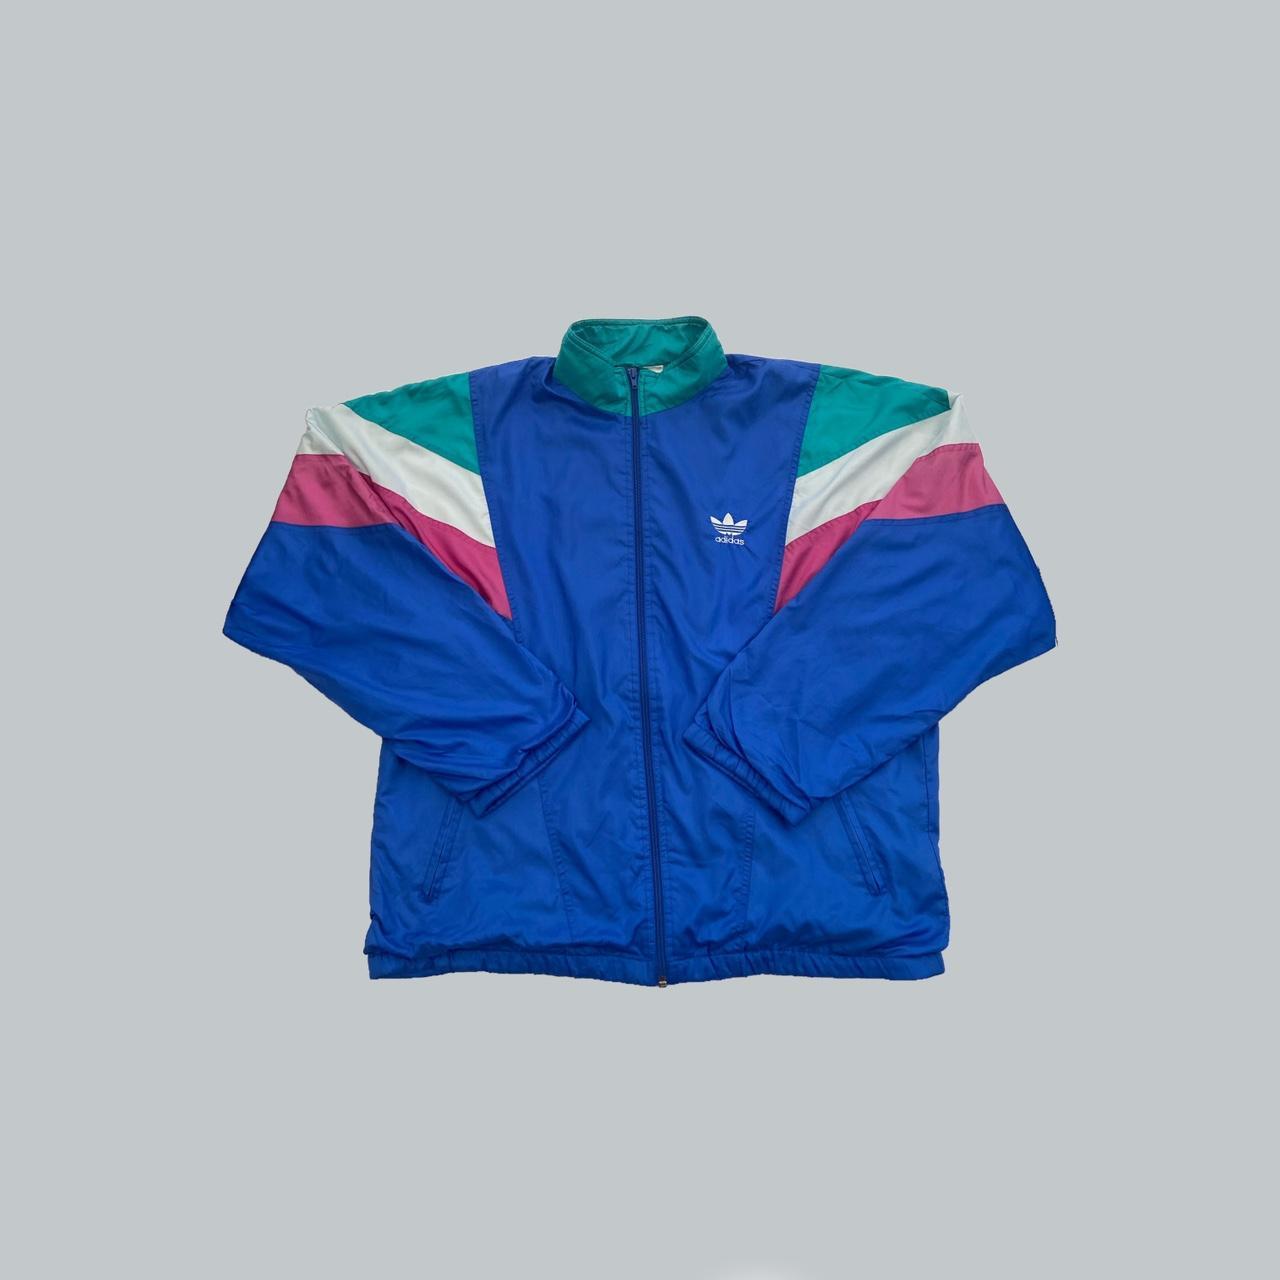 Vintage Adidas Shell Jacket Blue, white, pink and... - Depop